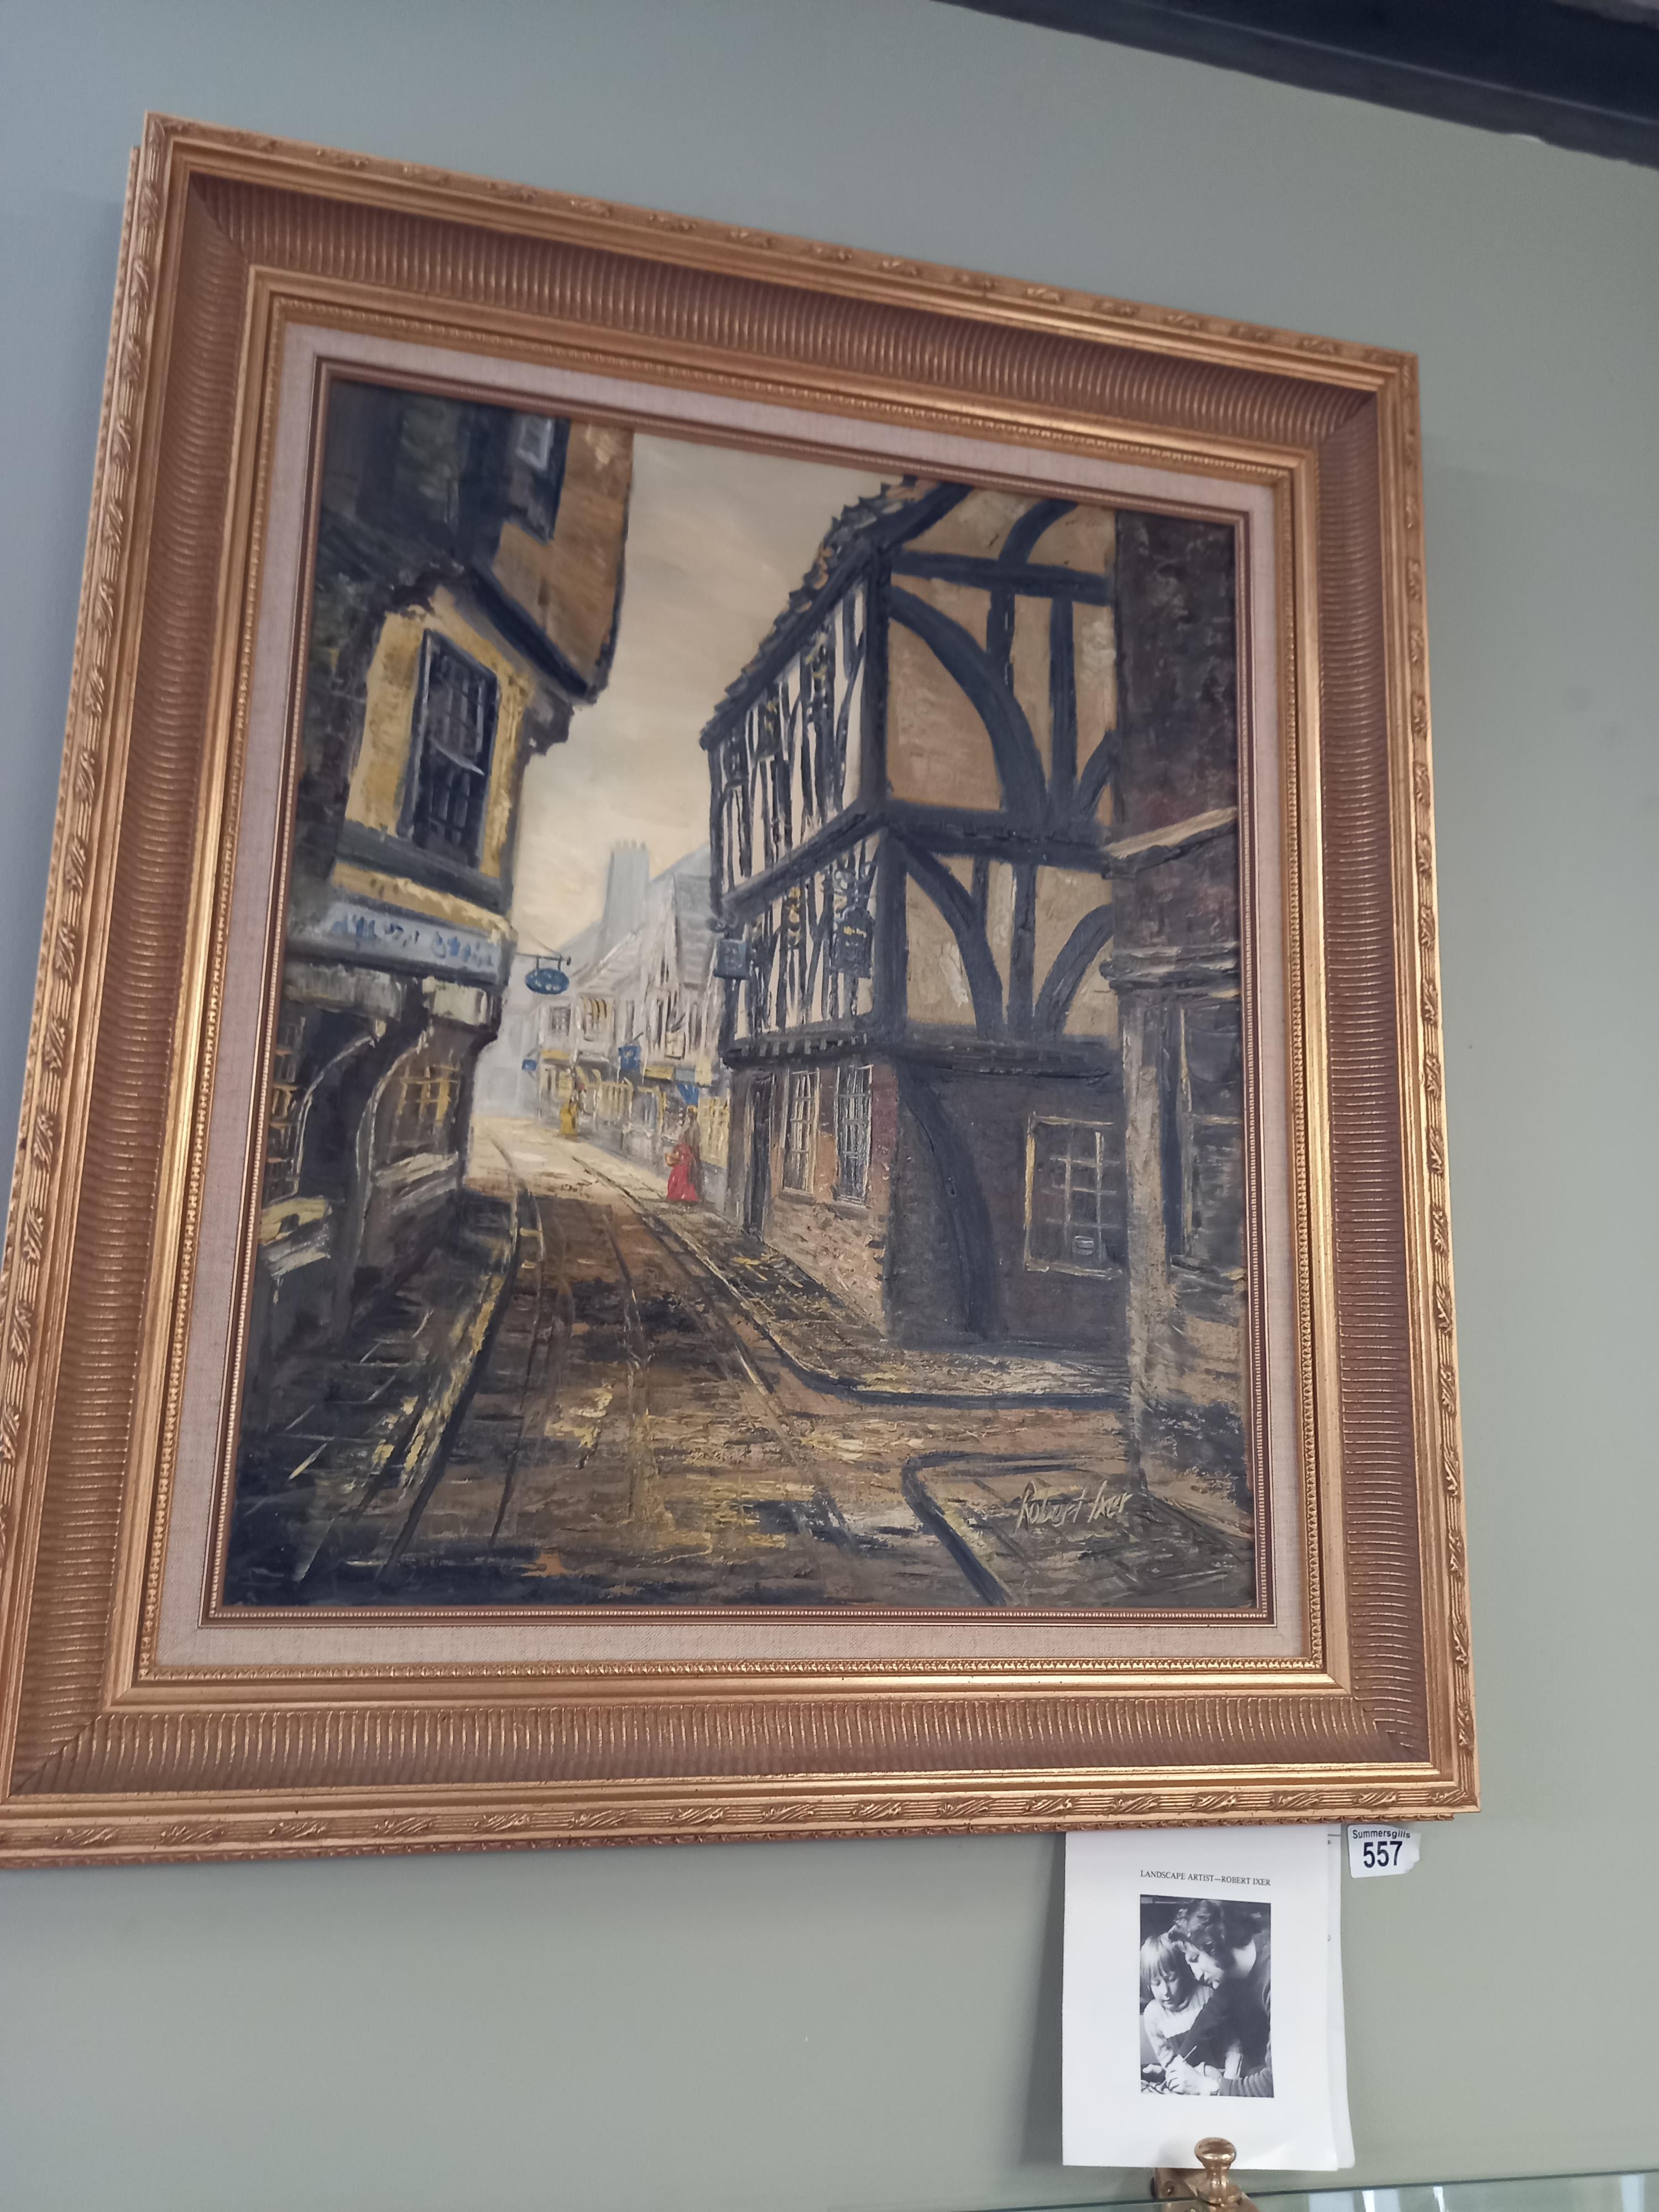 A Beautiful signed Oil painting of the Shambles by Landscape artist Robert Ixer